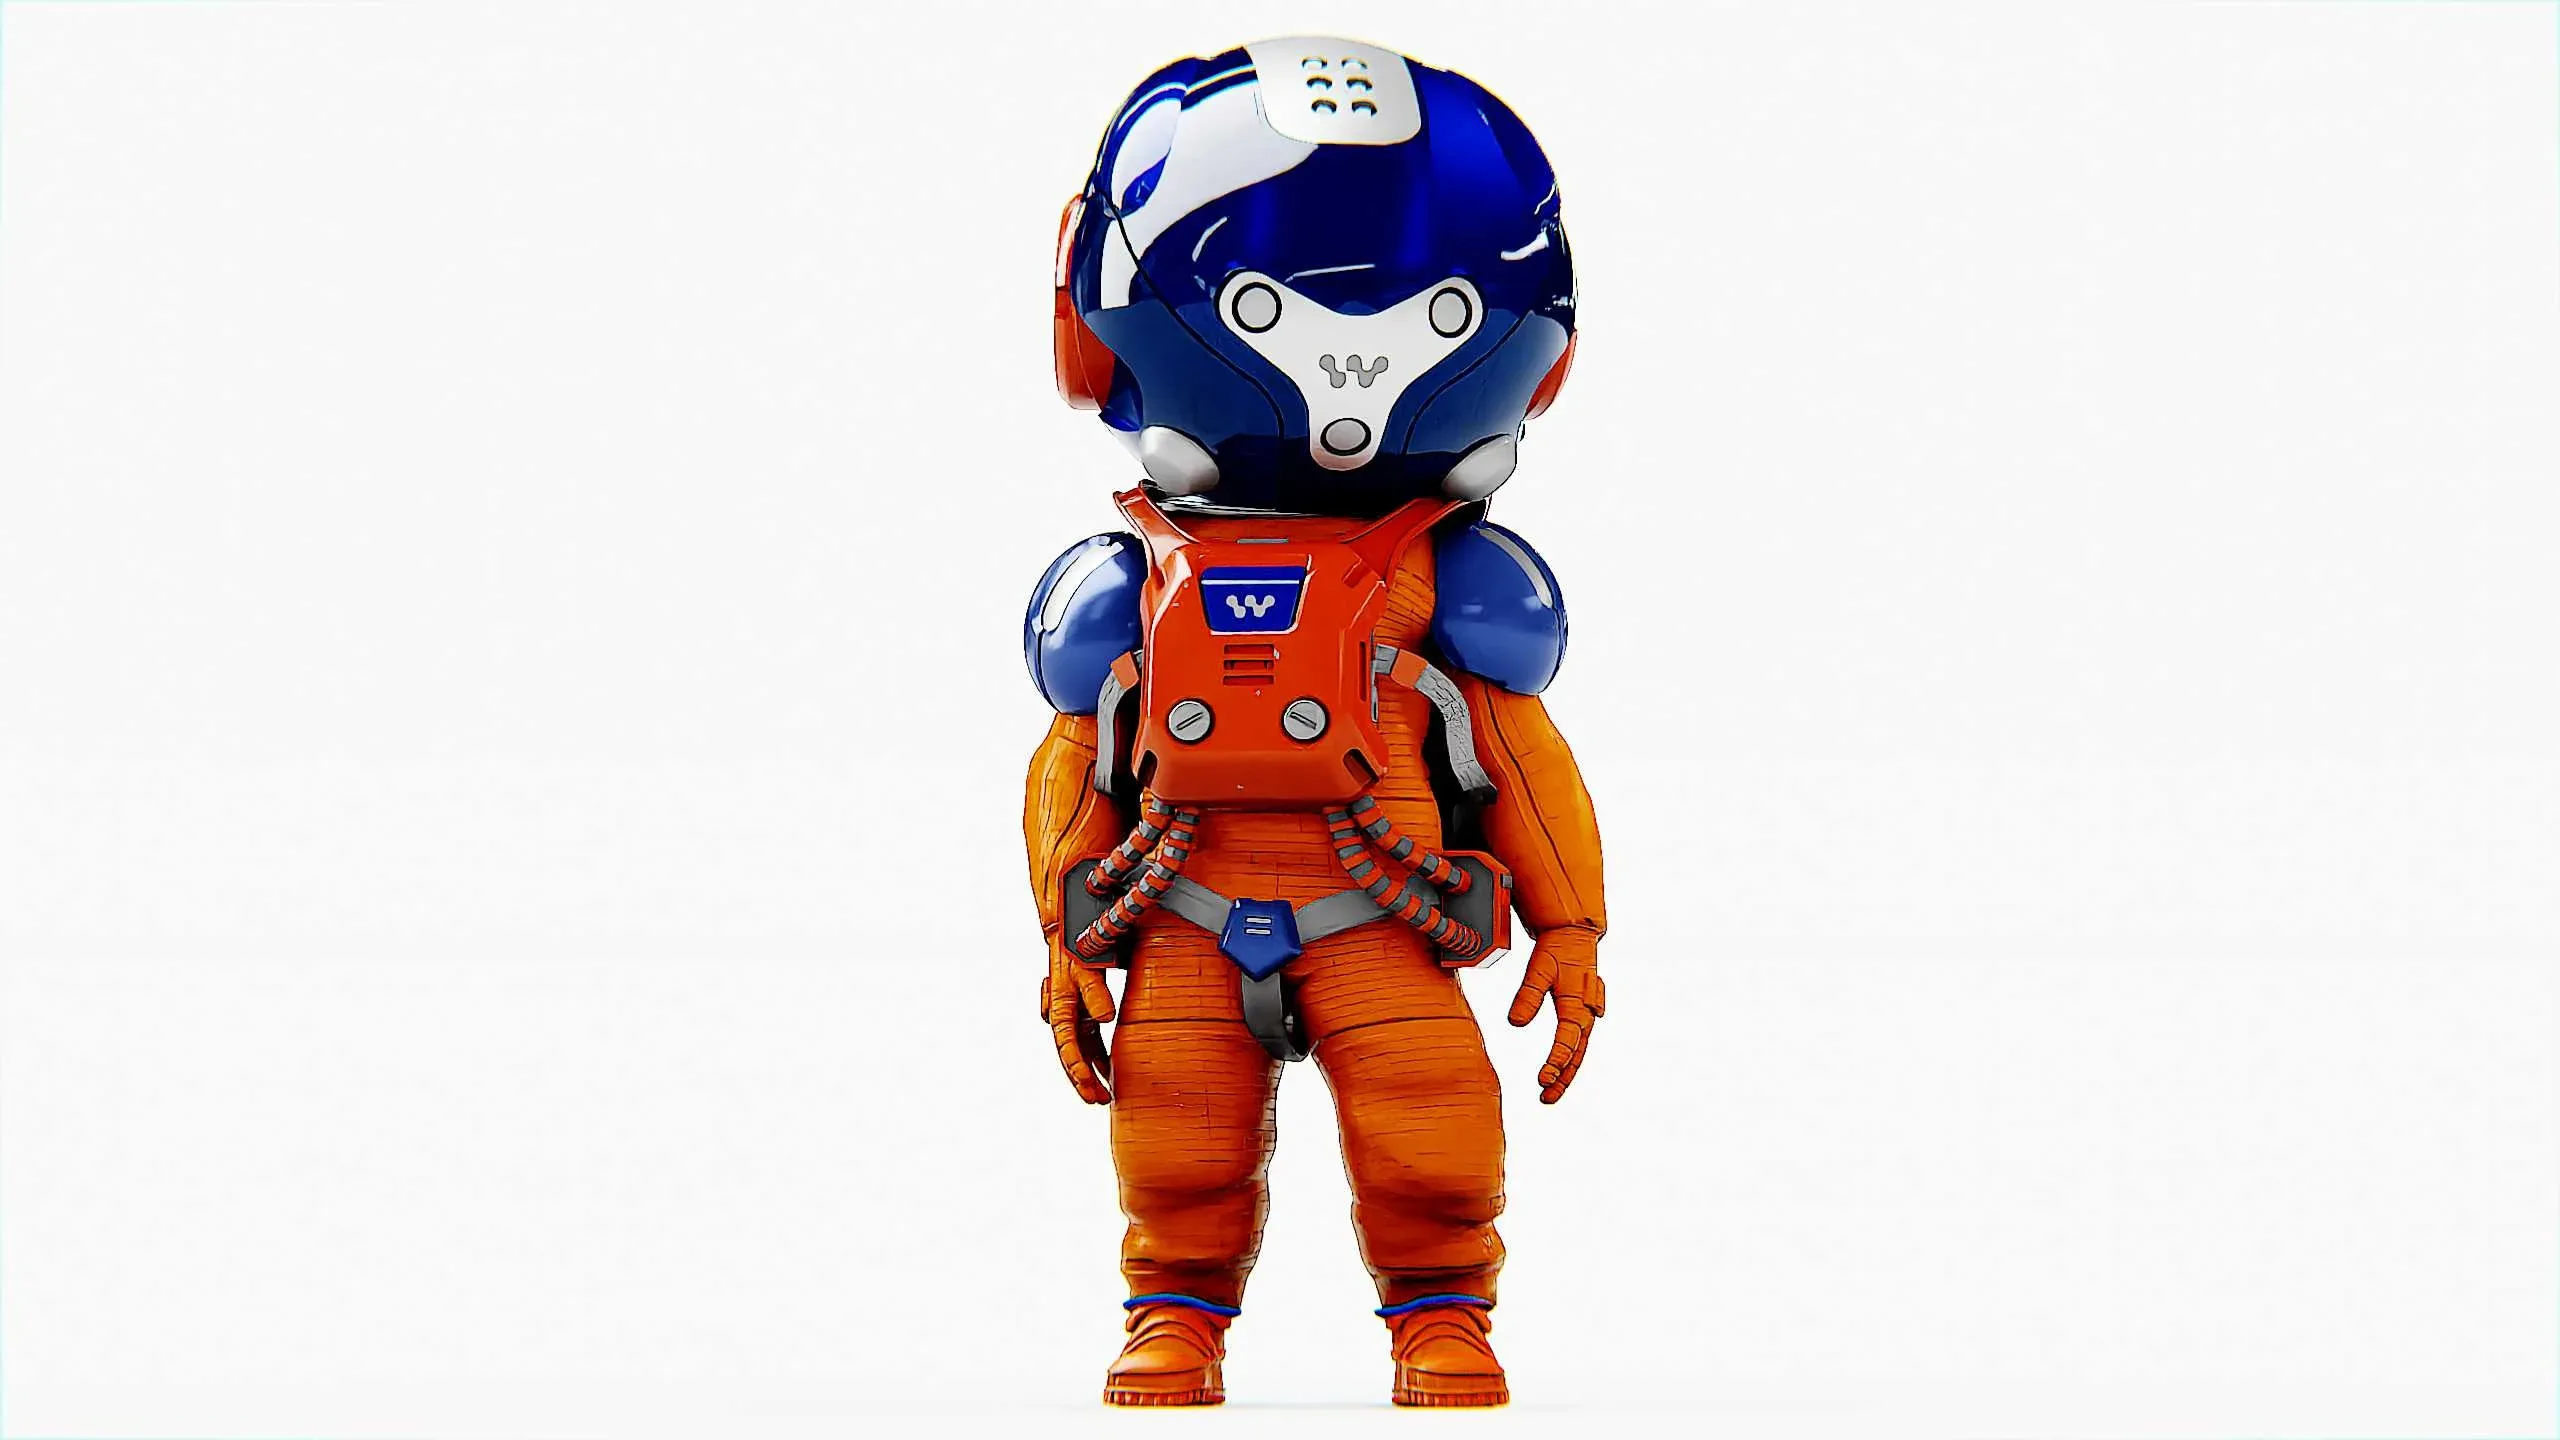 Toon Astronaut B-K Auto-Rig Pro Rigged For Mixamo, Unreal Engine Unity